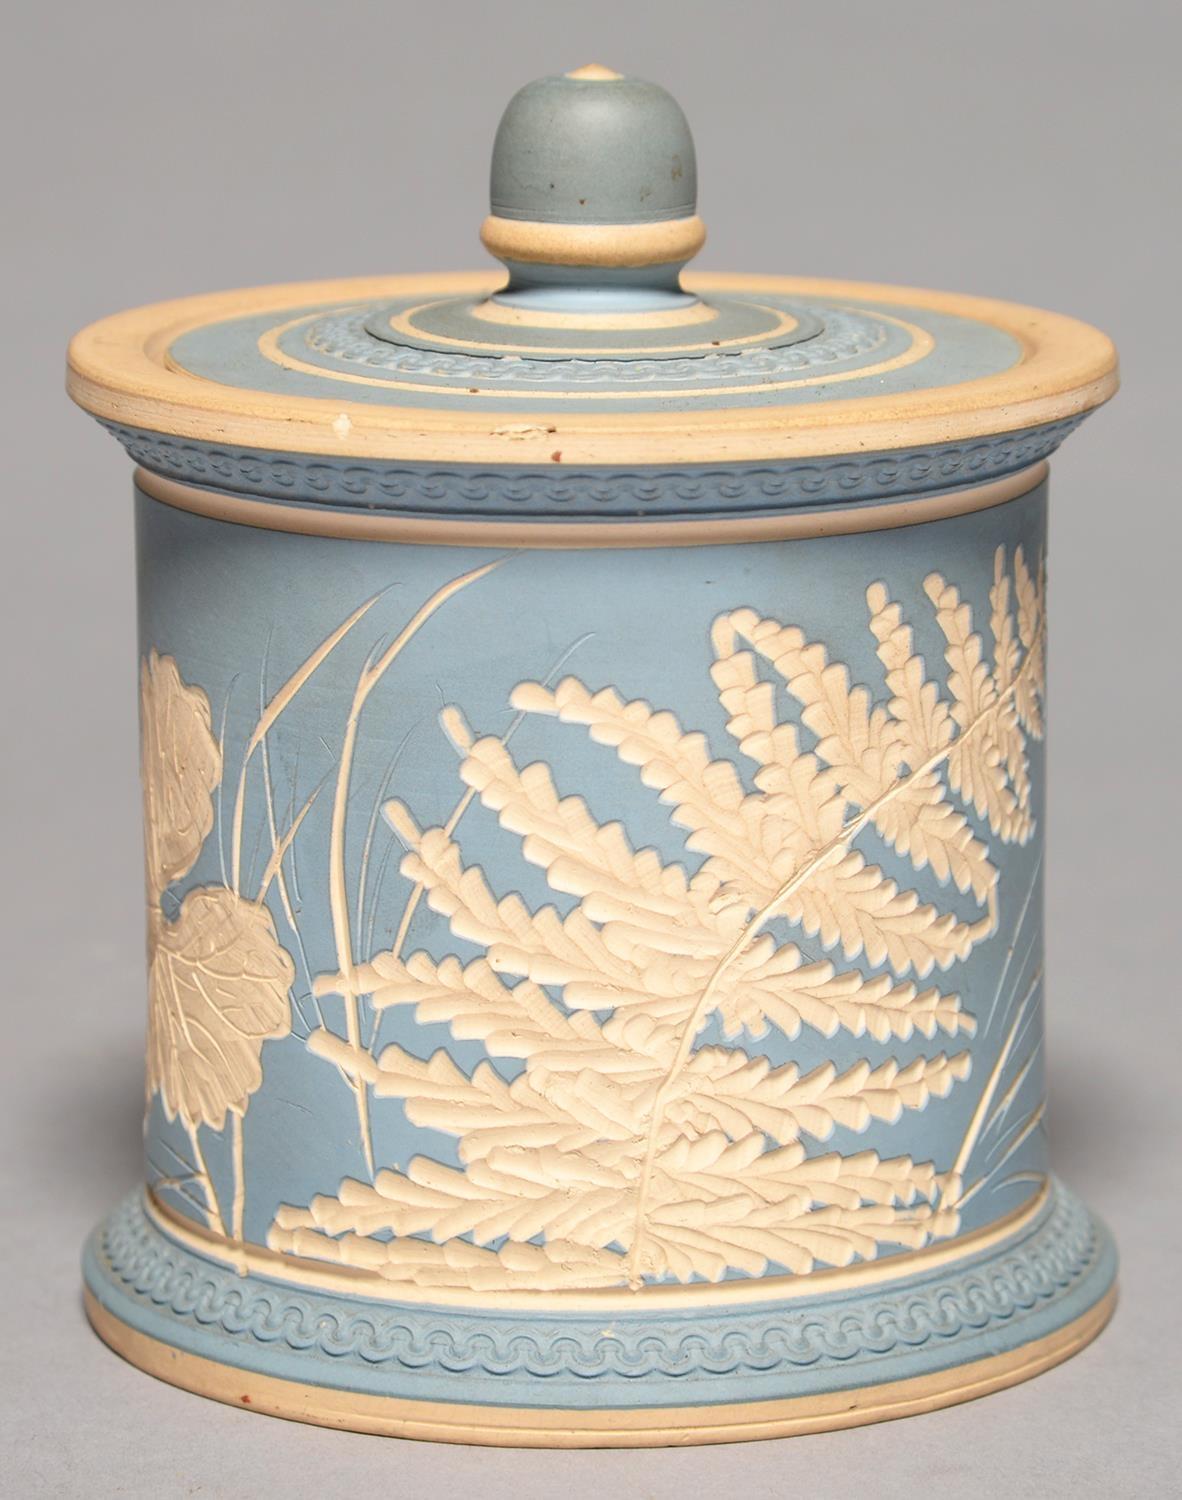 A SALOPIAN ART POTTERY TOBACCO JAR AND COBER, C1900- before 1925, COVERED IN WEDGWOOD BLUE SLIP